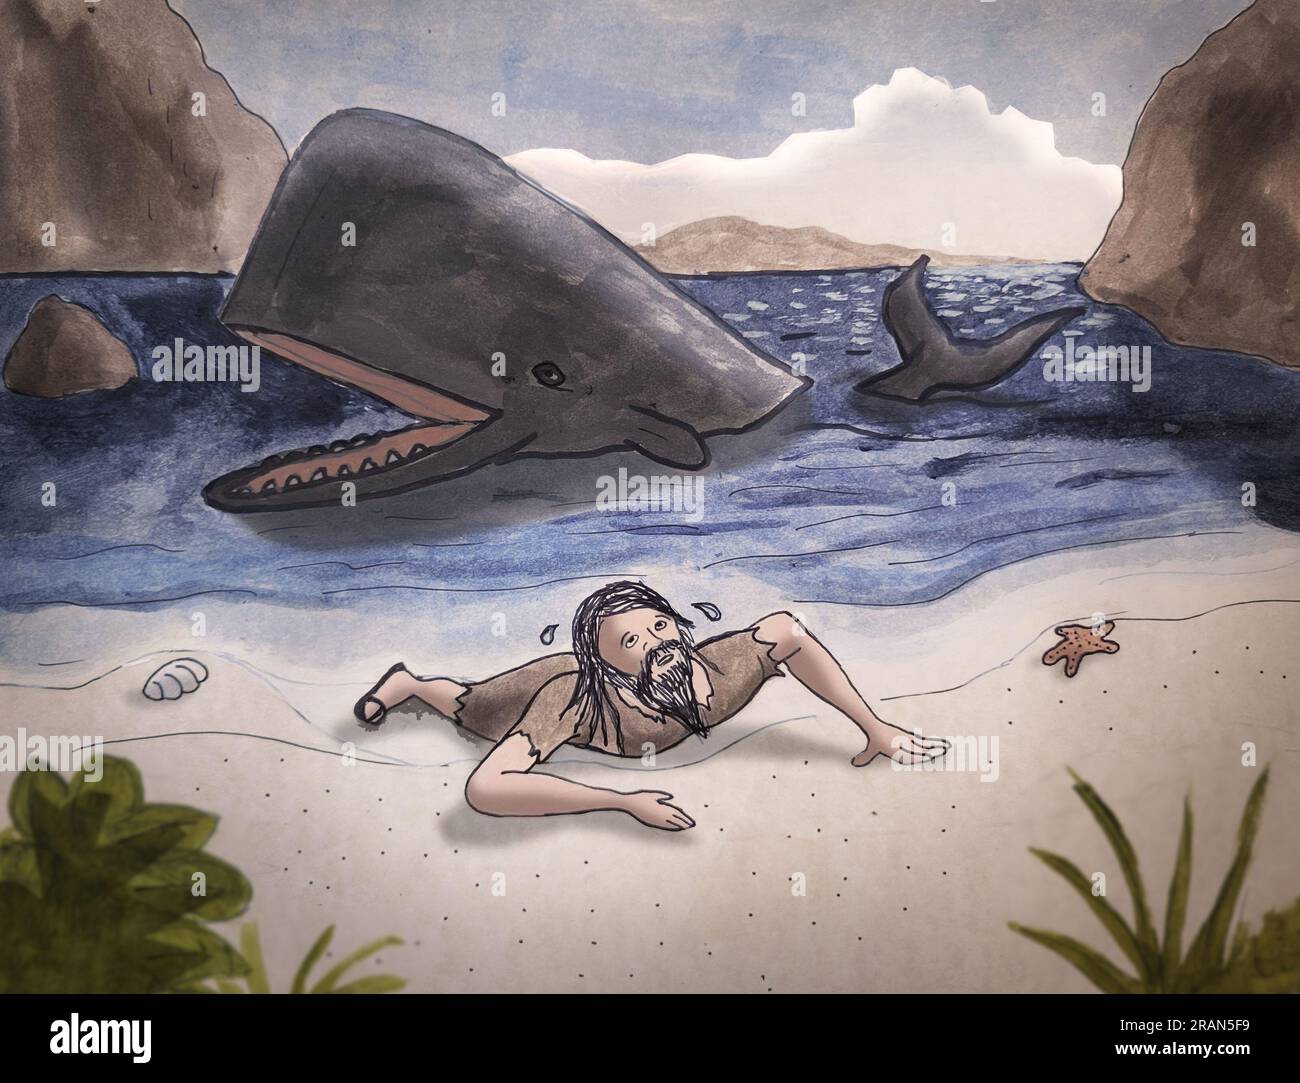 From the Bible story, Jonah washes ashore after having spent 3 days in the belly of the whale. Stock Photo